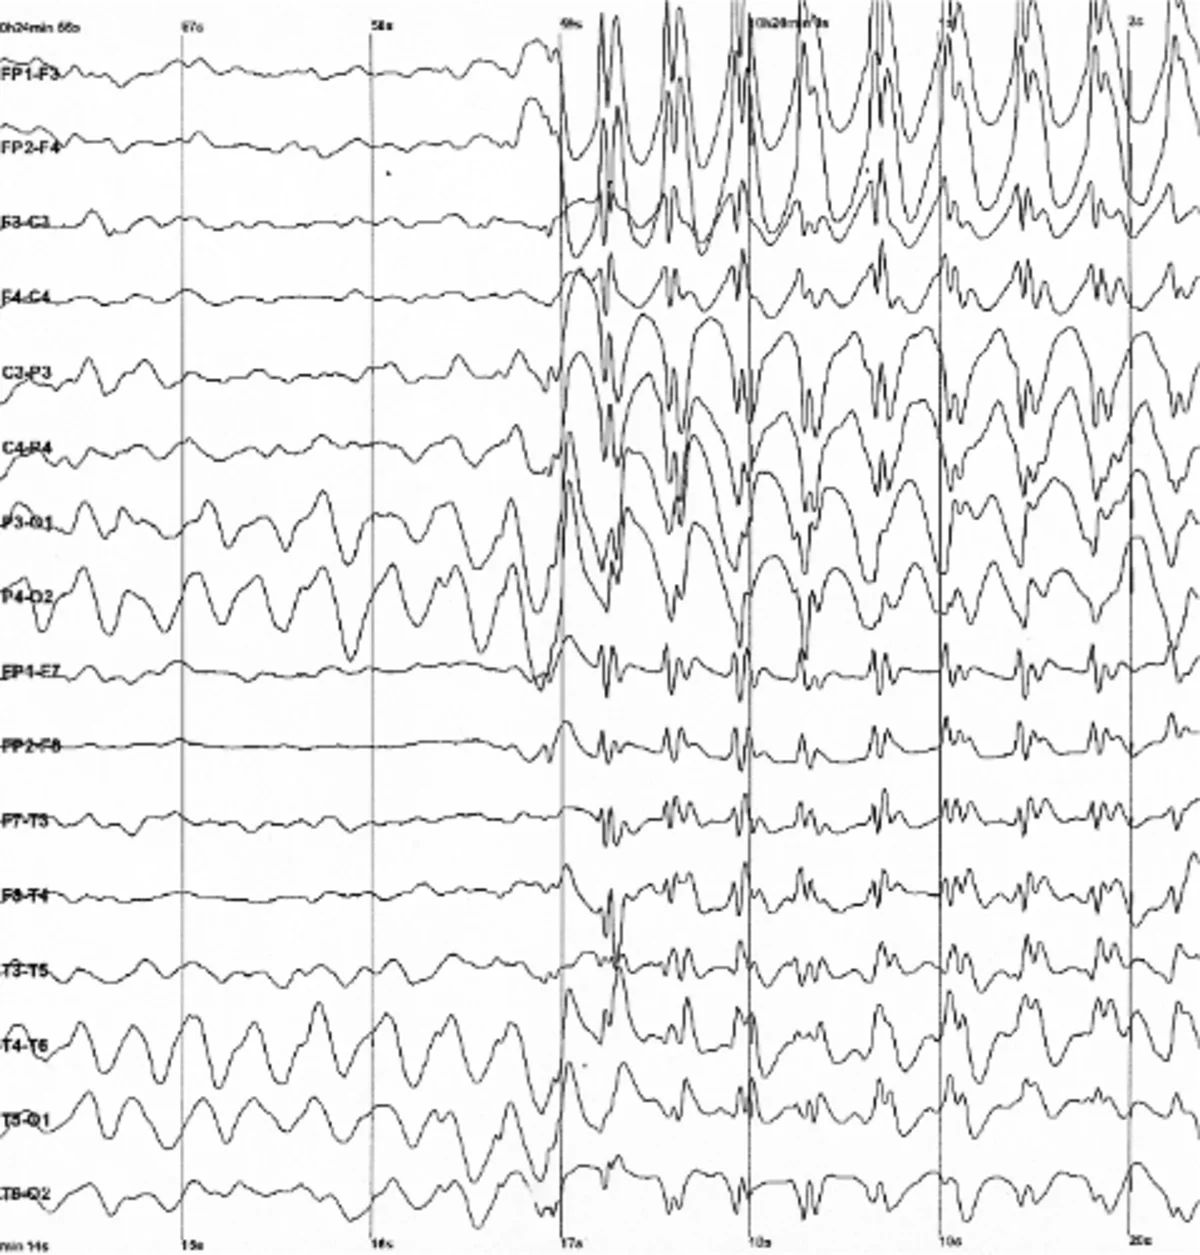 Spike and wave discharges monitored with EEG [source](https://en.wikipedia.org/wiki/Electroencephalography)